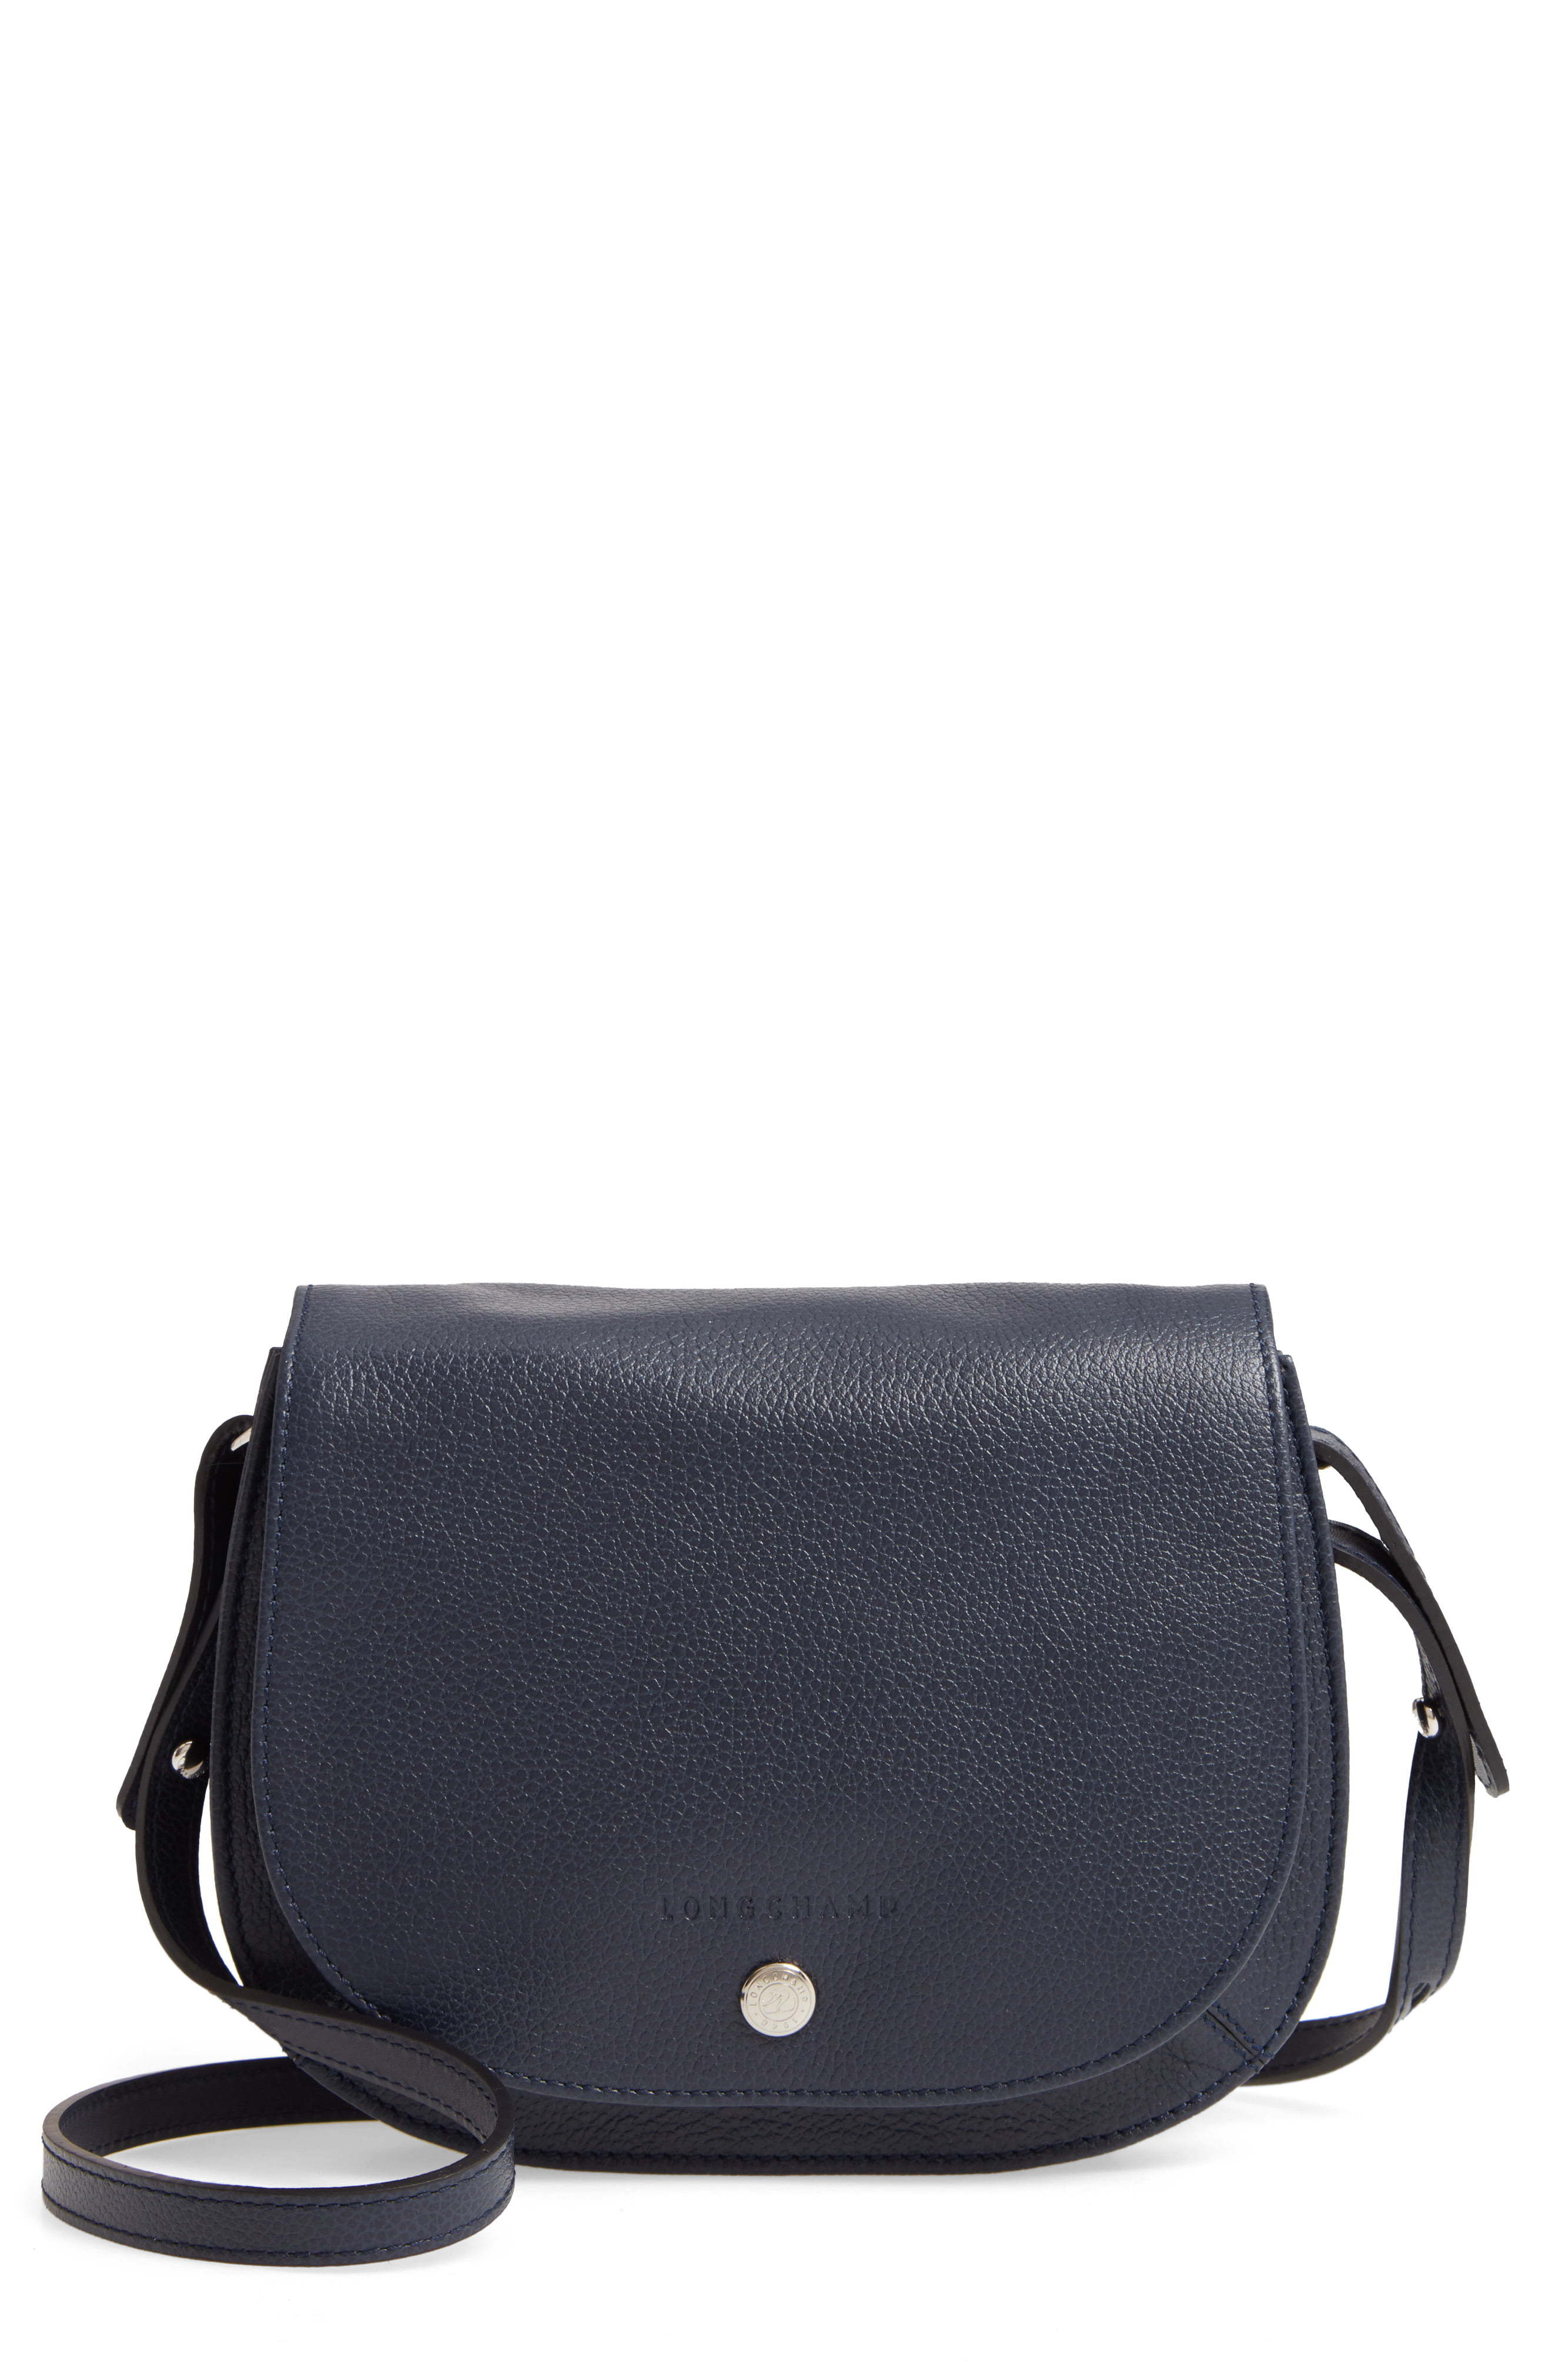 Longchamp Small Le Foulonne Leather Crossbody Bag, $395 | Nordstrom ...